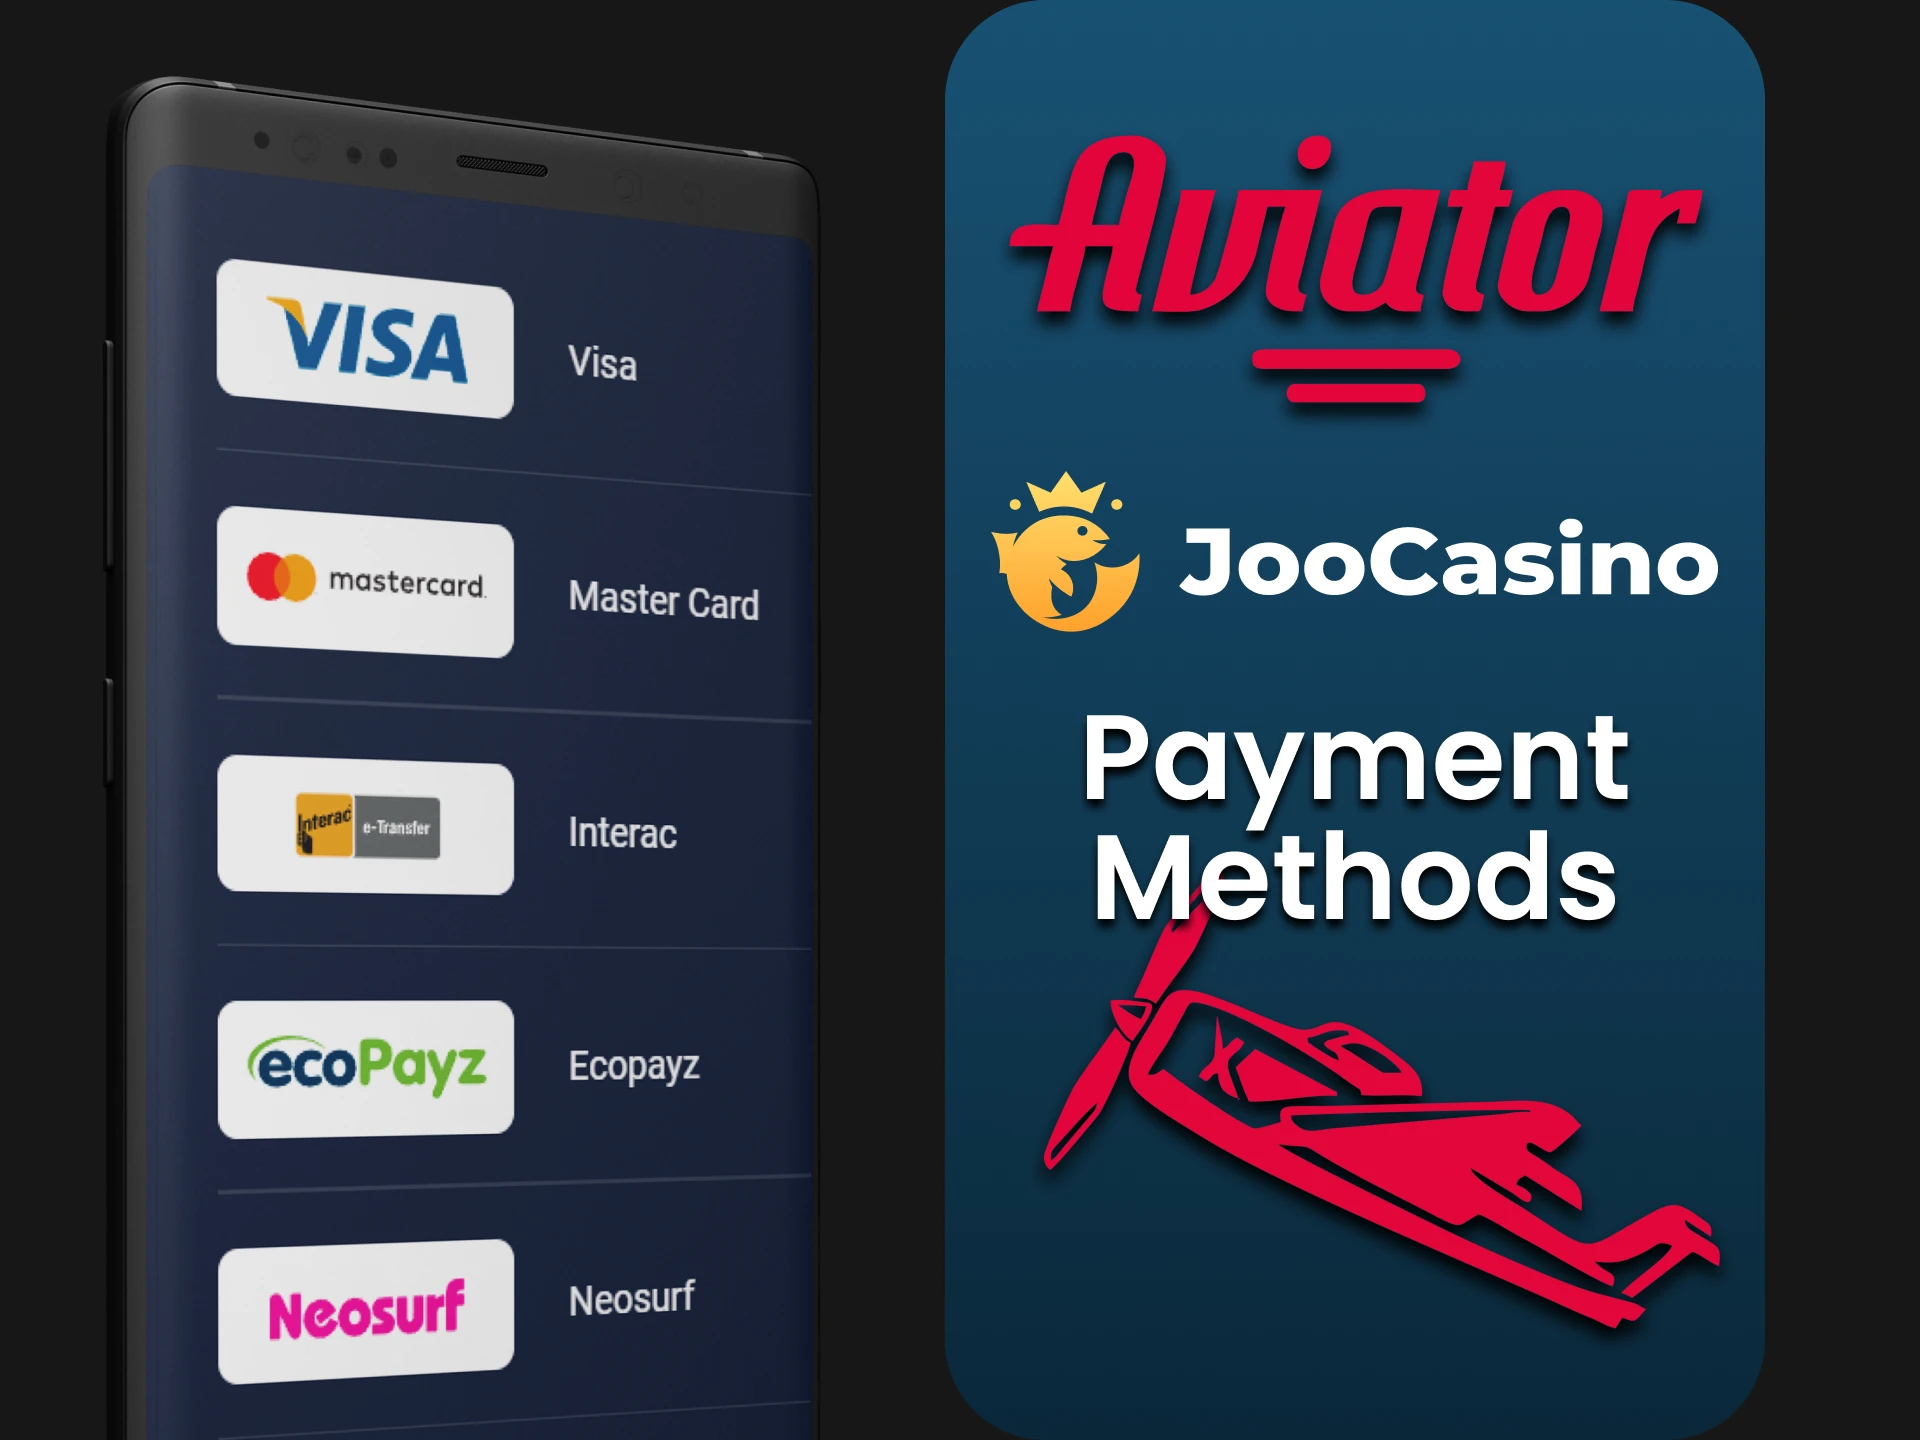 Choose your payment method in the Joo Casino application for Aviator.